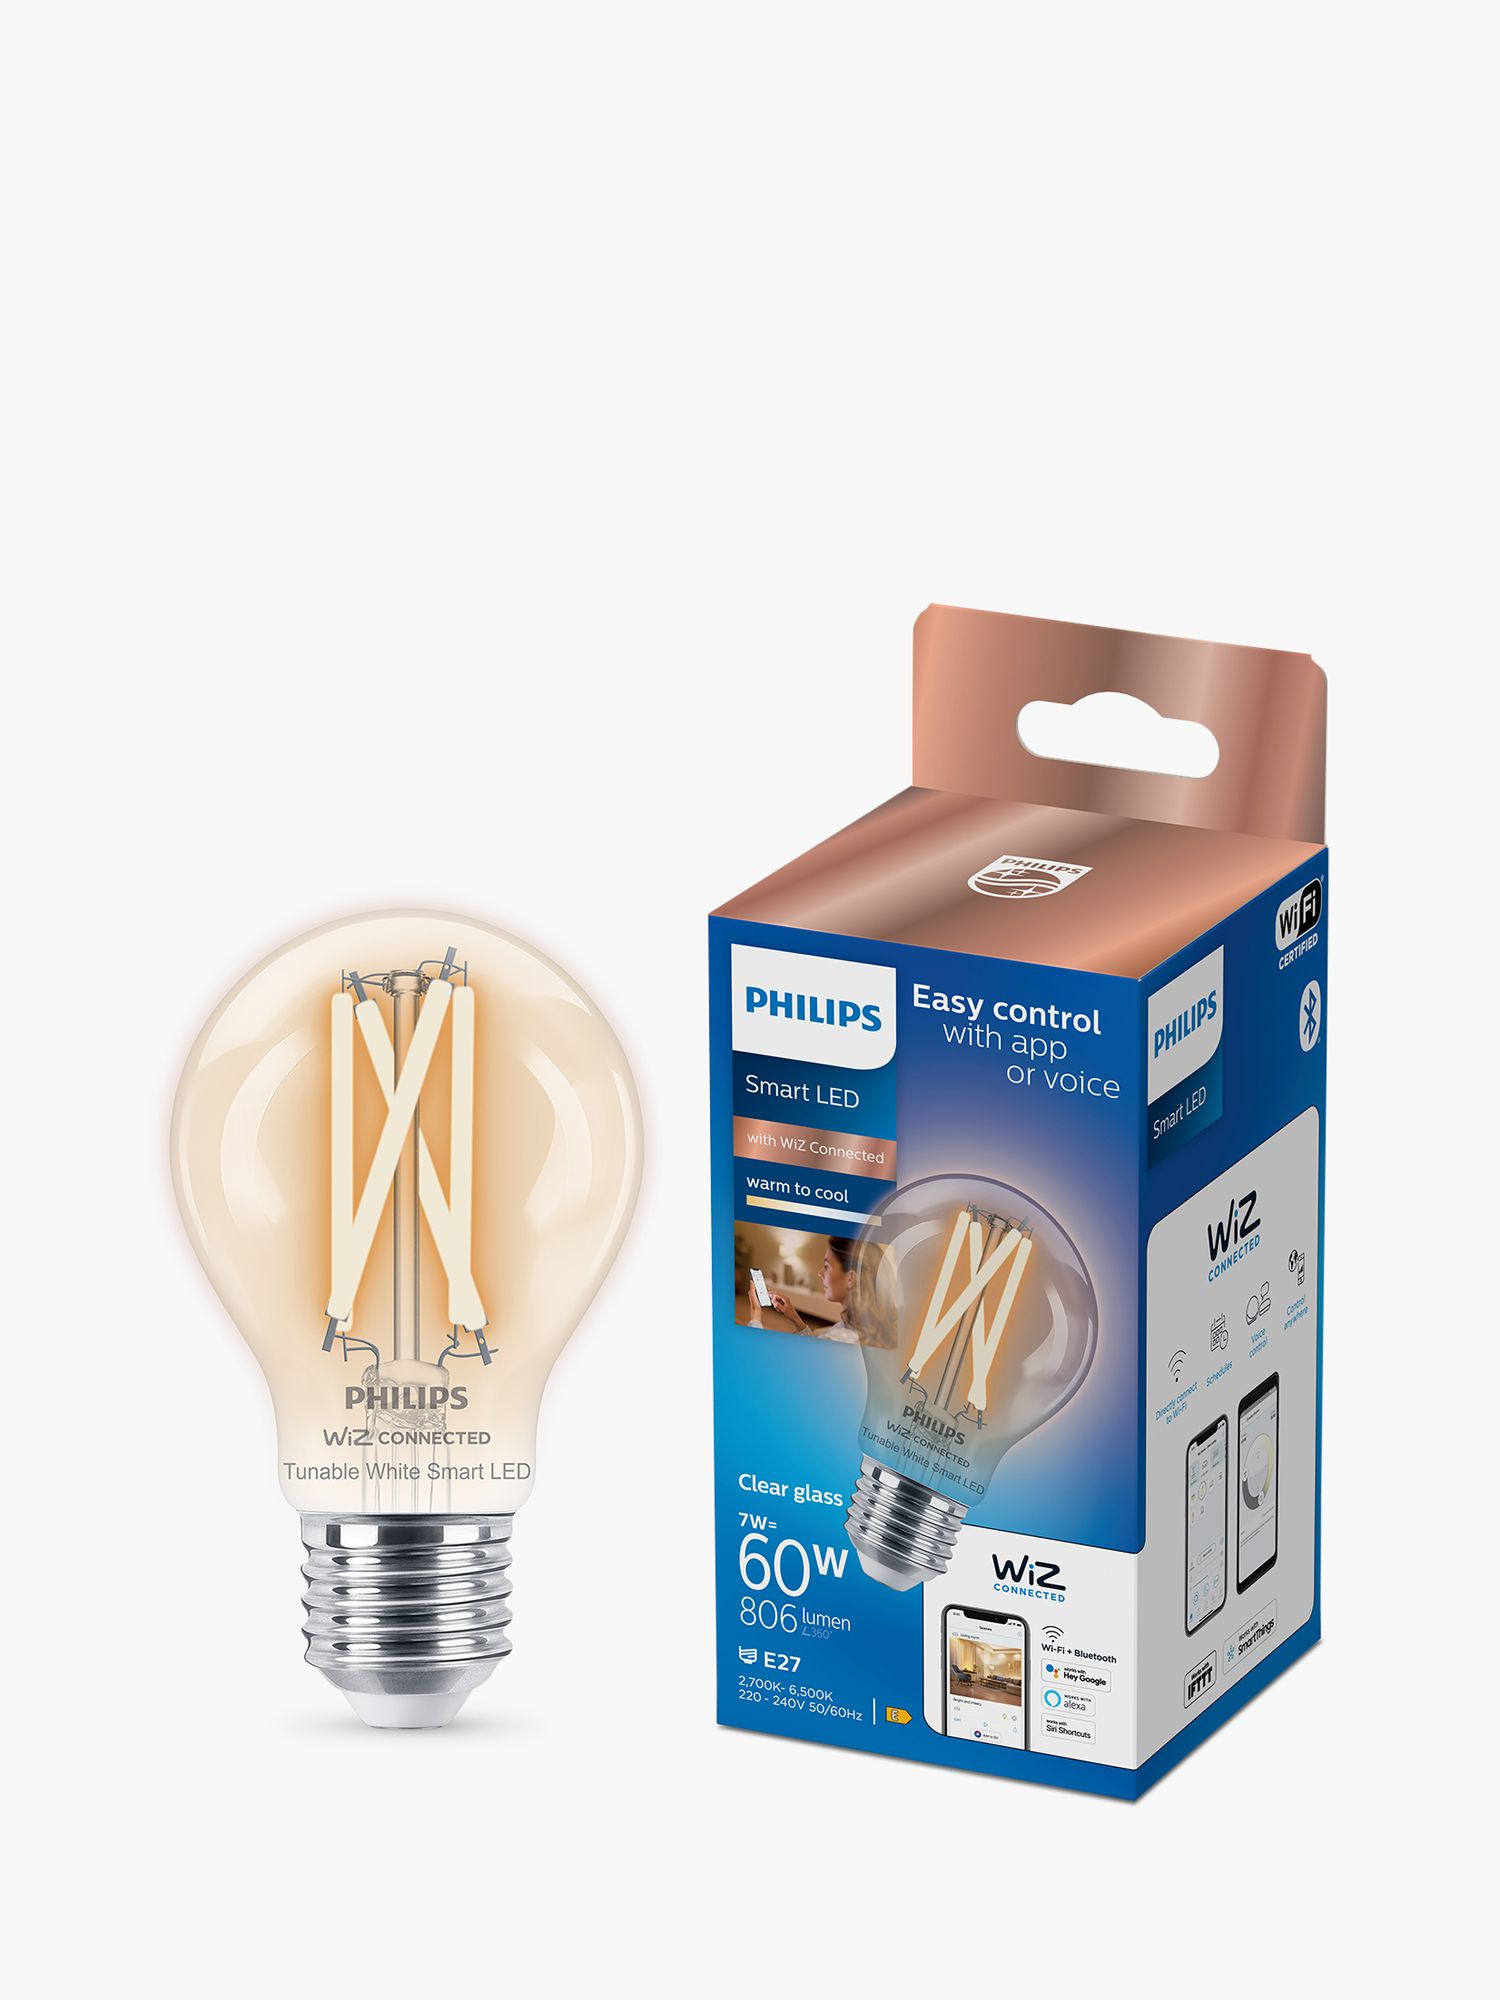 Photo of Philips smart led 7w e27 dimmable warm-to-cool classic bulb with wiz connected and bluetooth clear